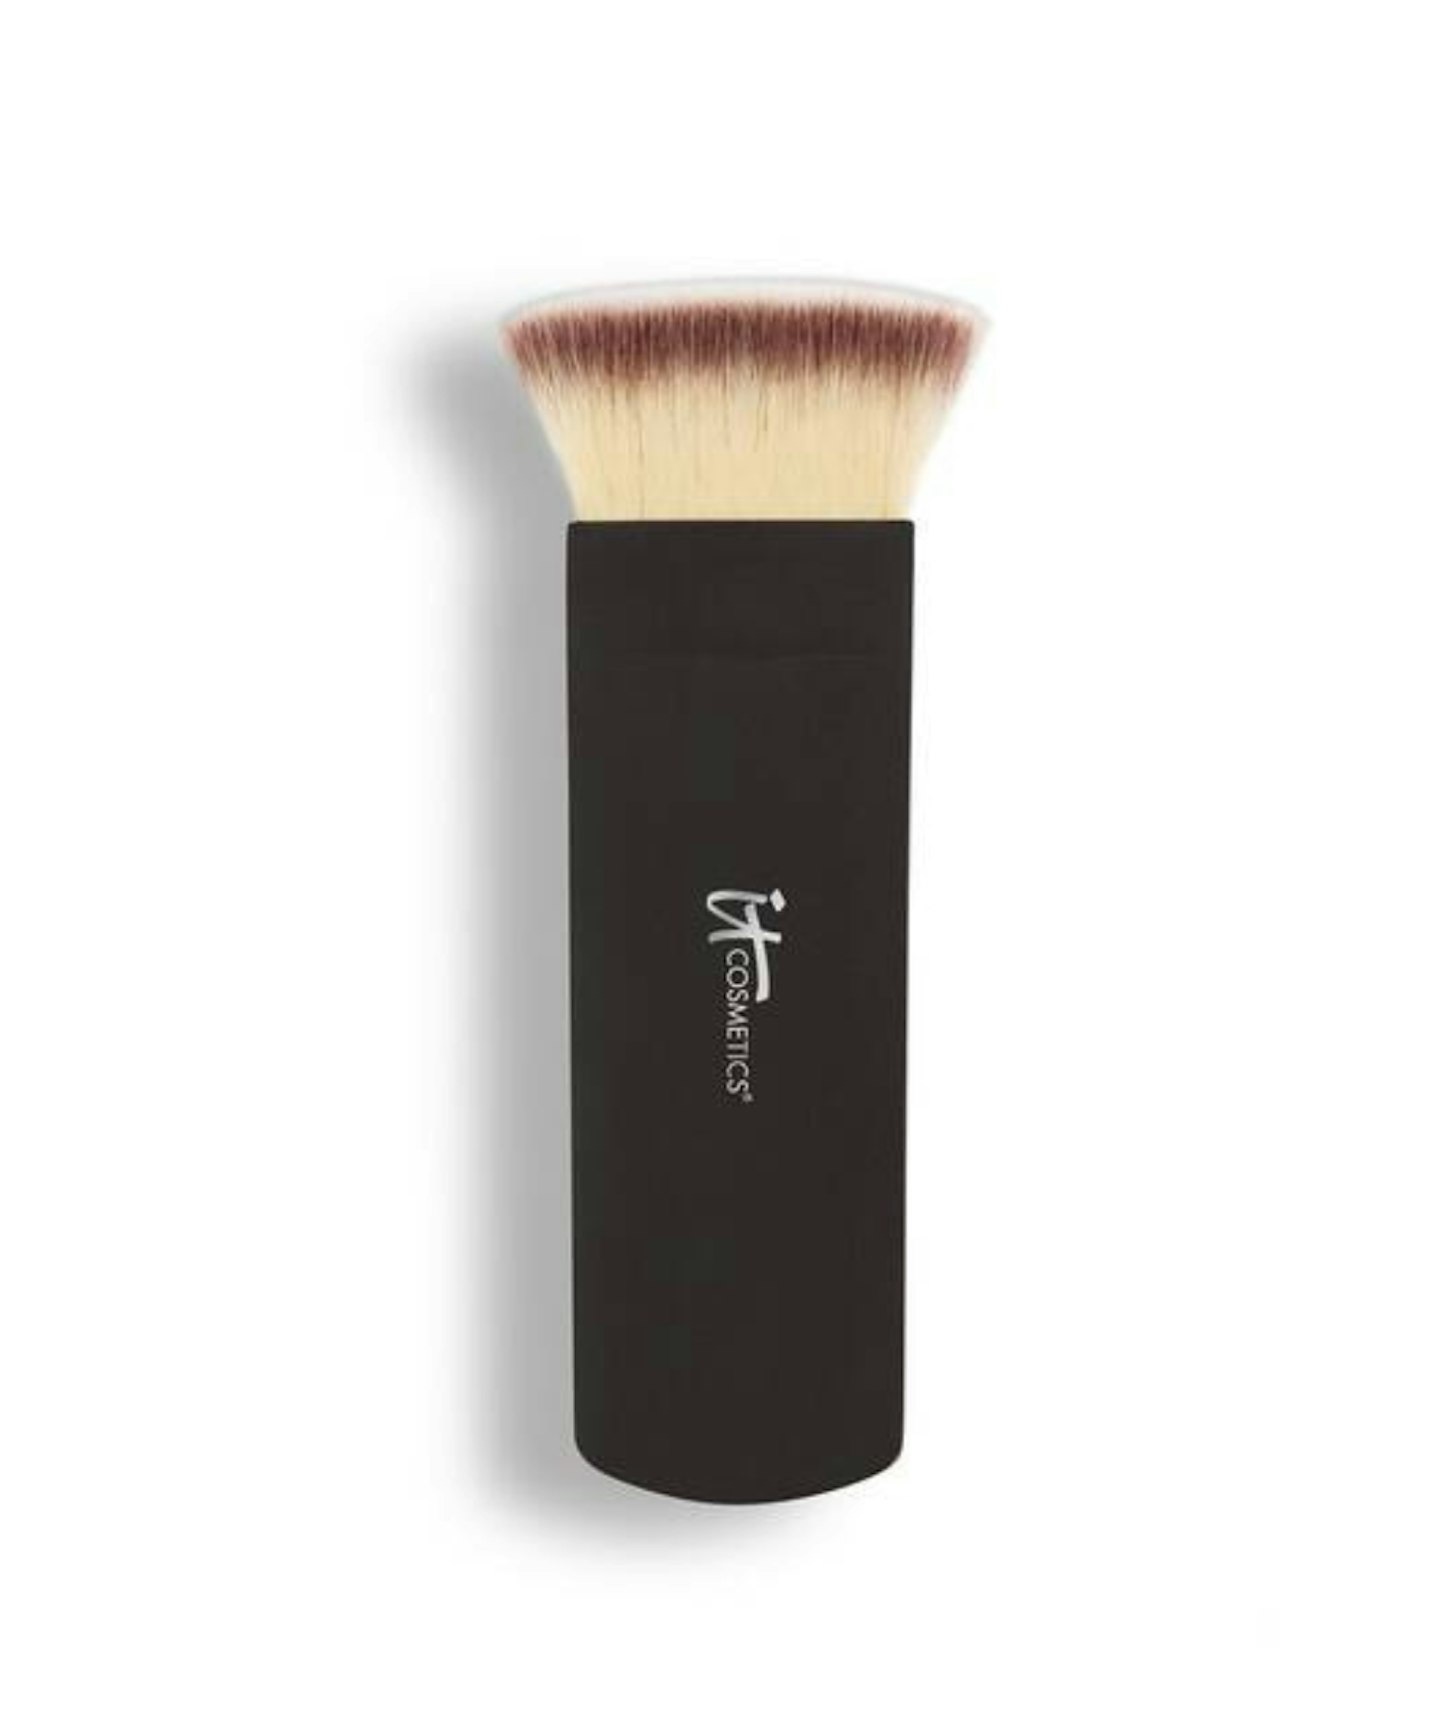 It Cosmetics Heavenly Luxe You Sculpted! Contour & Highlight Brush